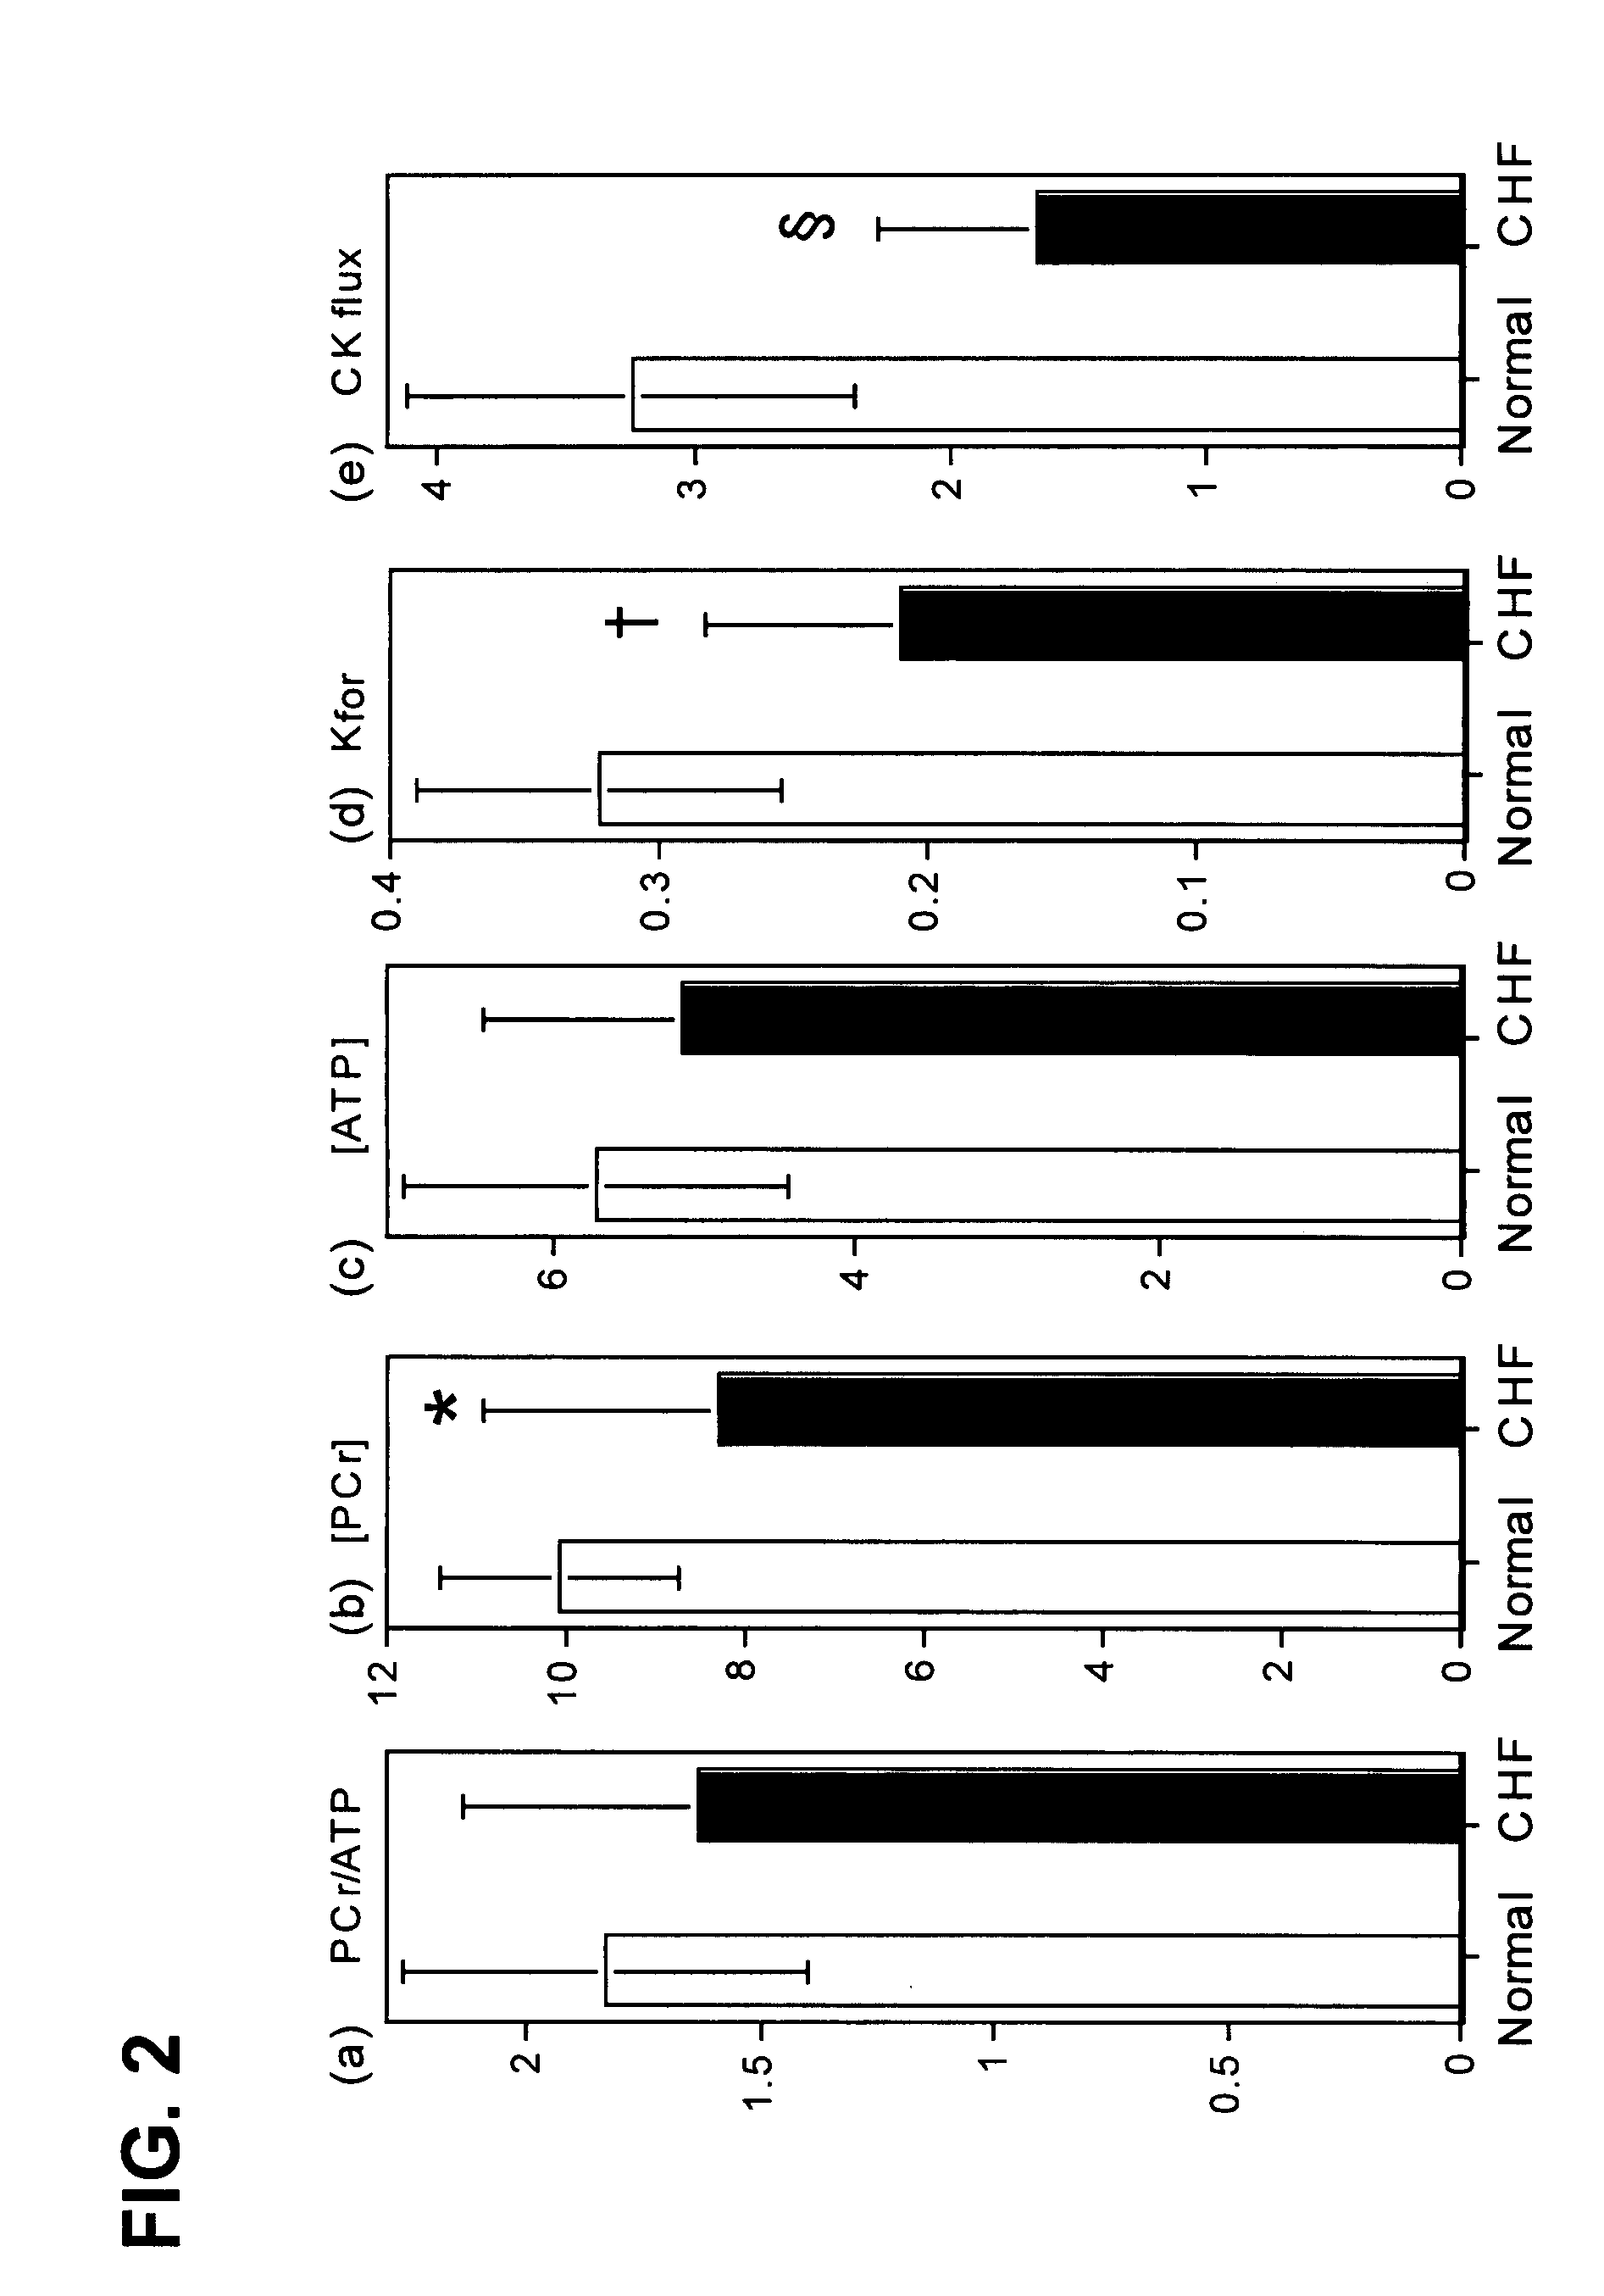 Methods to improve creatine kinase metabolism and contractile function in cardiac muscle for the treatment of heart failure